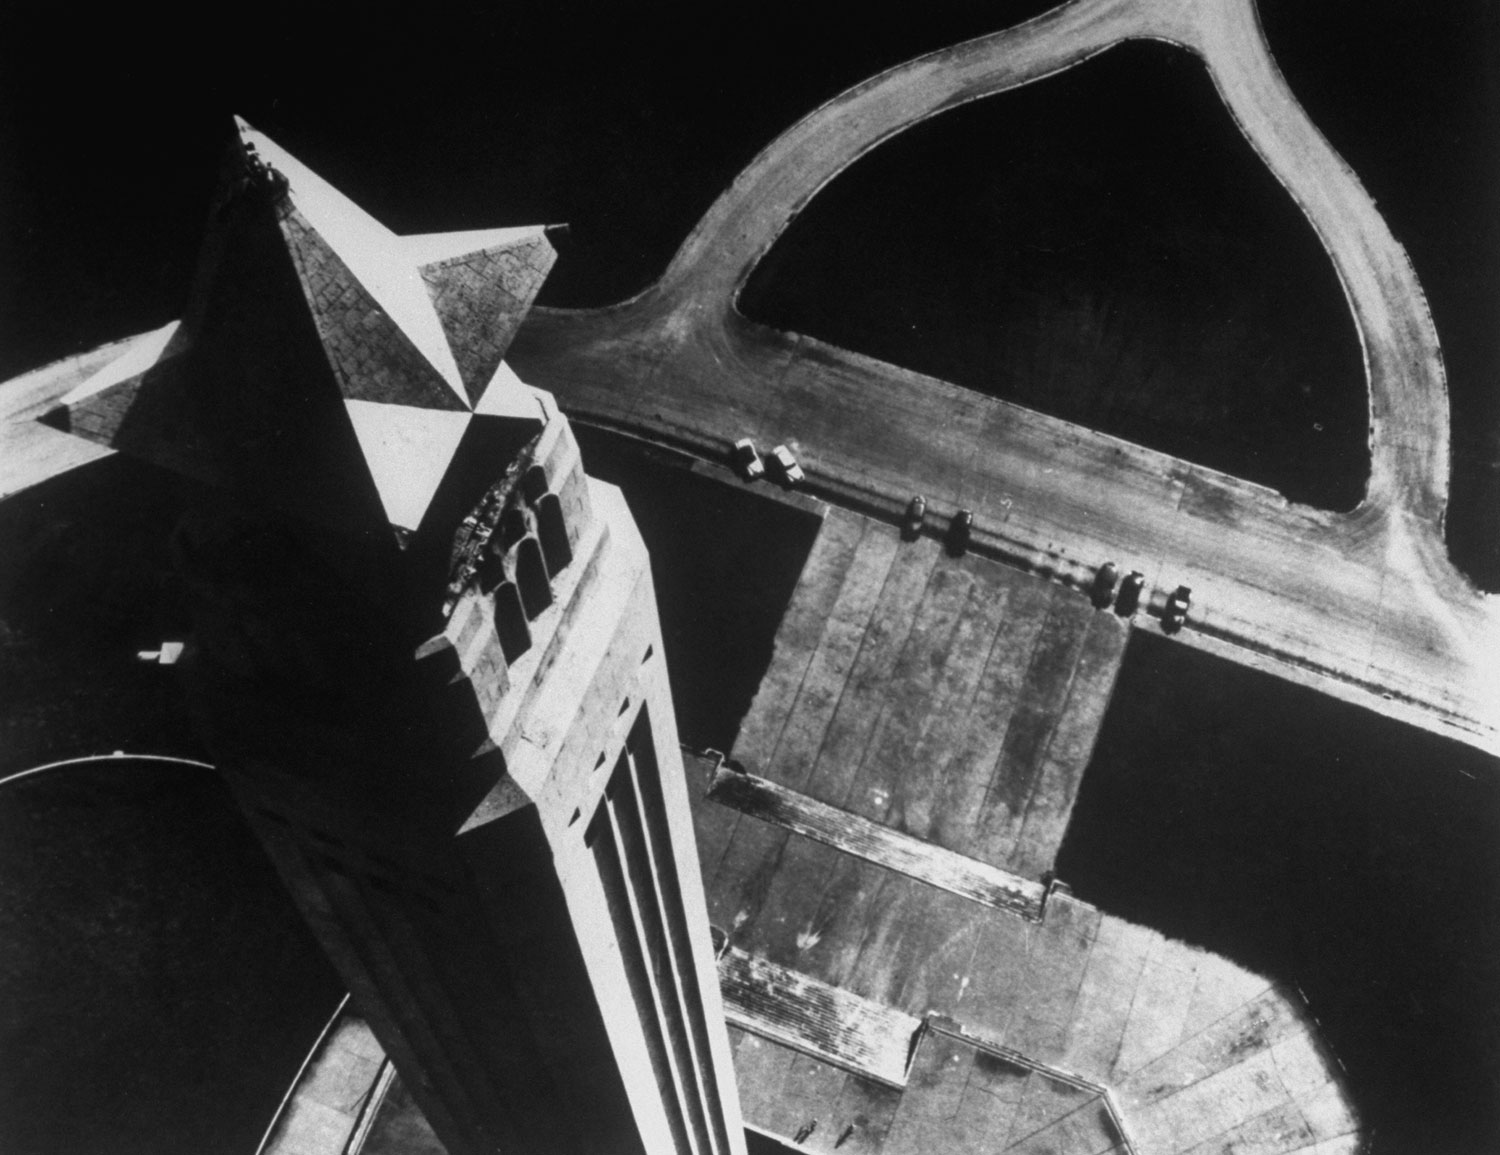 Over the Texas star on the San Jacinto Monument near Houston, helicopter-borne camera looks sharply down 570-foot shaft to steps and parking space below. Tower marks spot where Sam Houston defeated General Santa Anna in 1836.